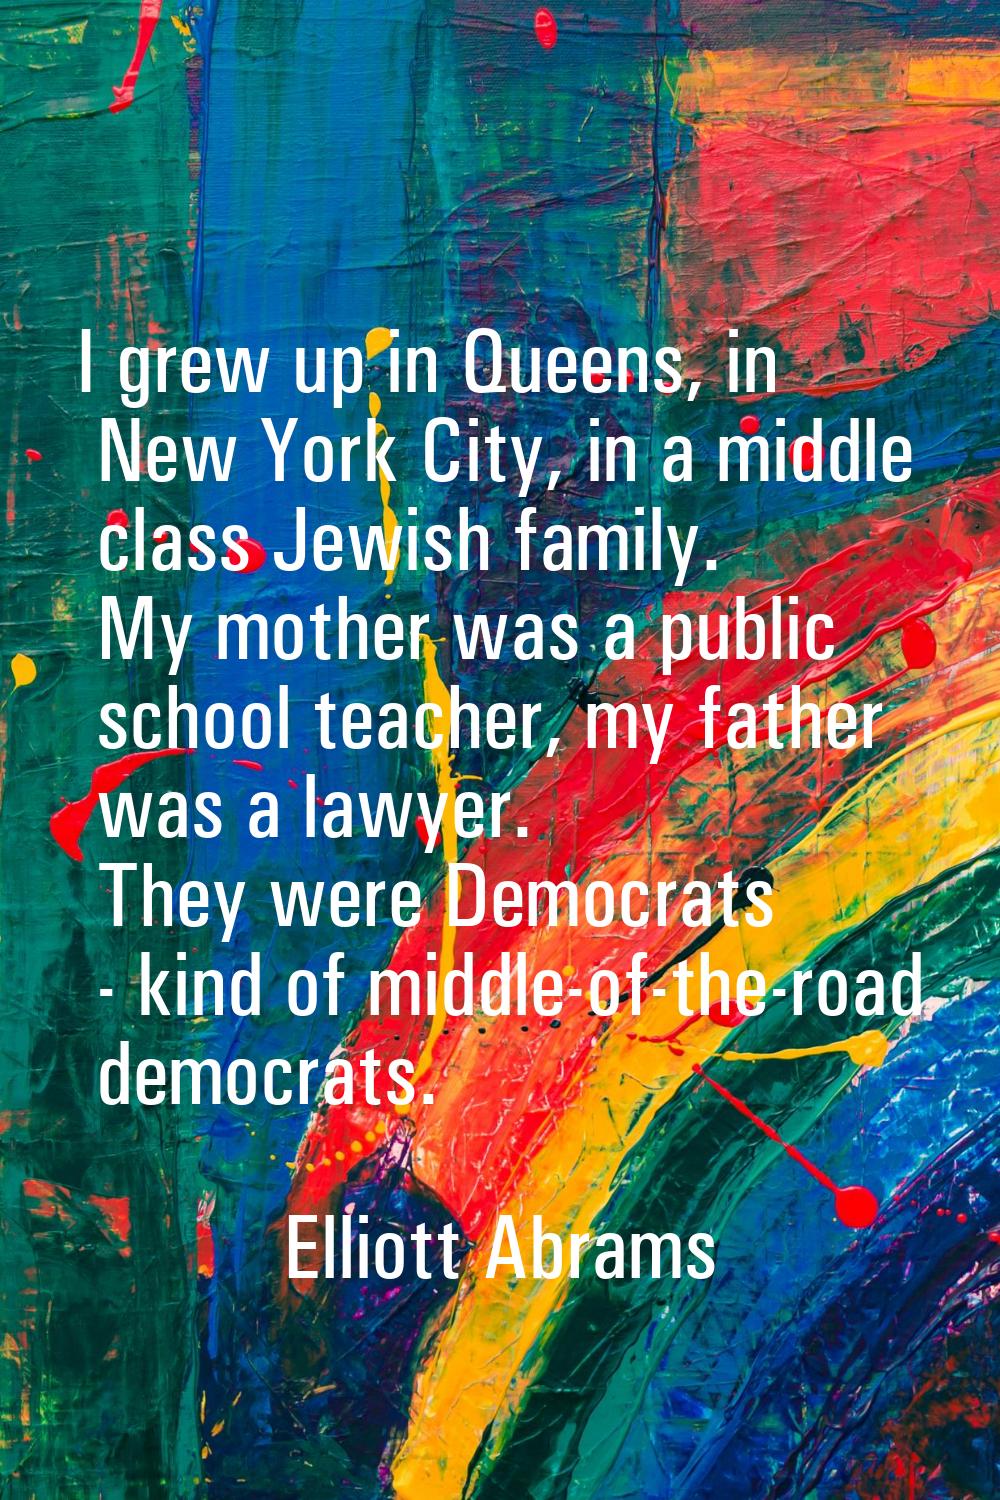 I grew up in Queens, in New York City, in a middle class Jewish family. My mother was a public scho